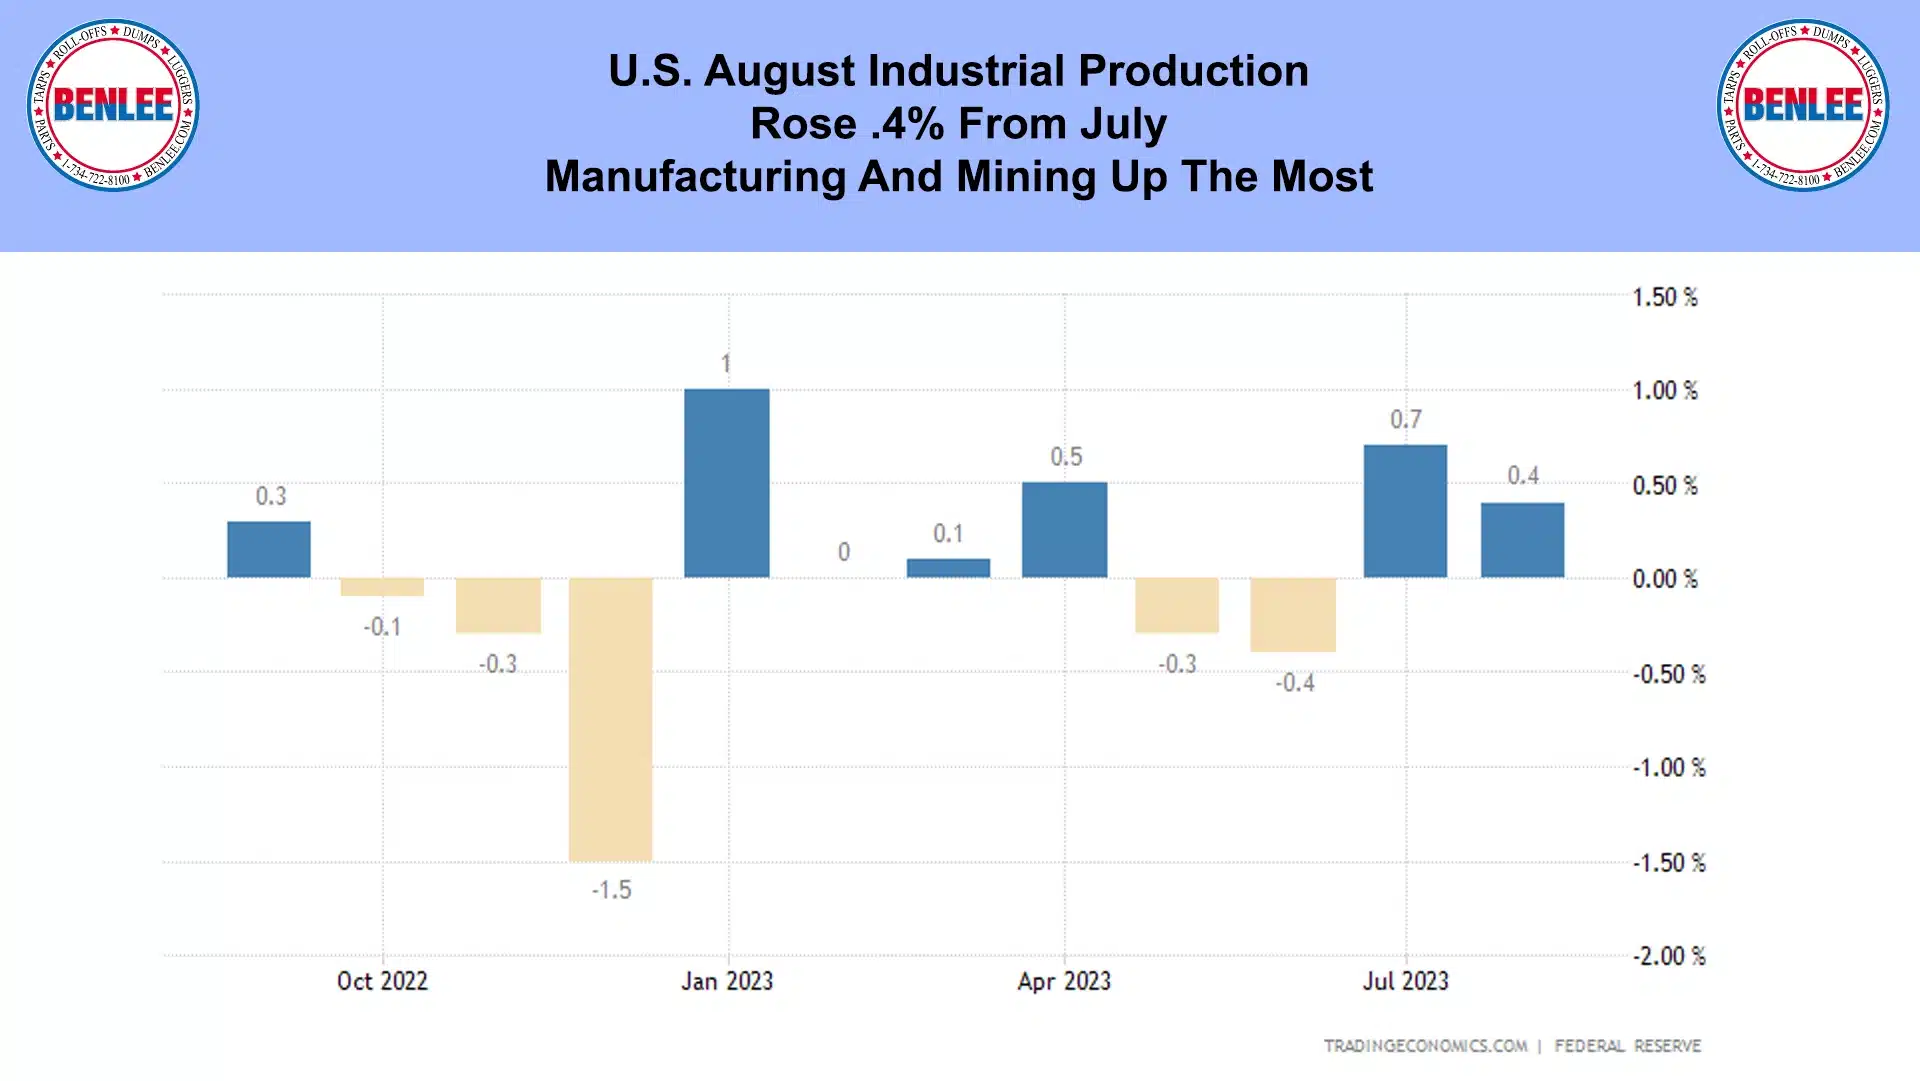 U.S. August Industrial Production